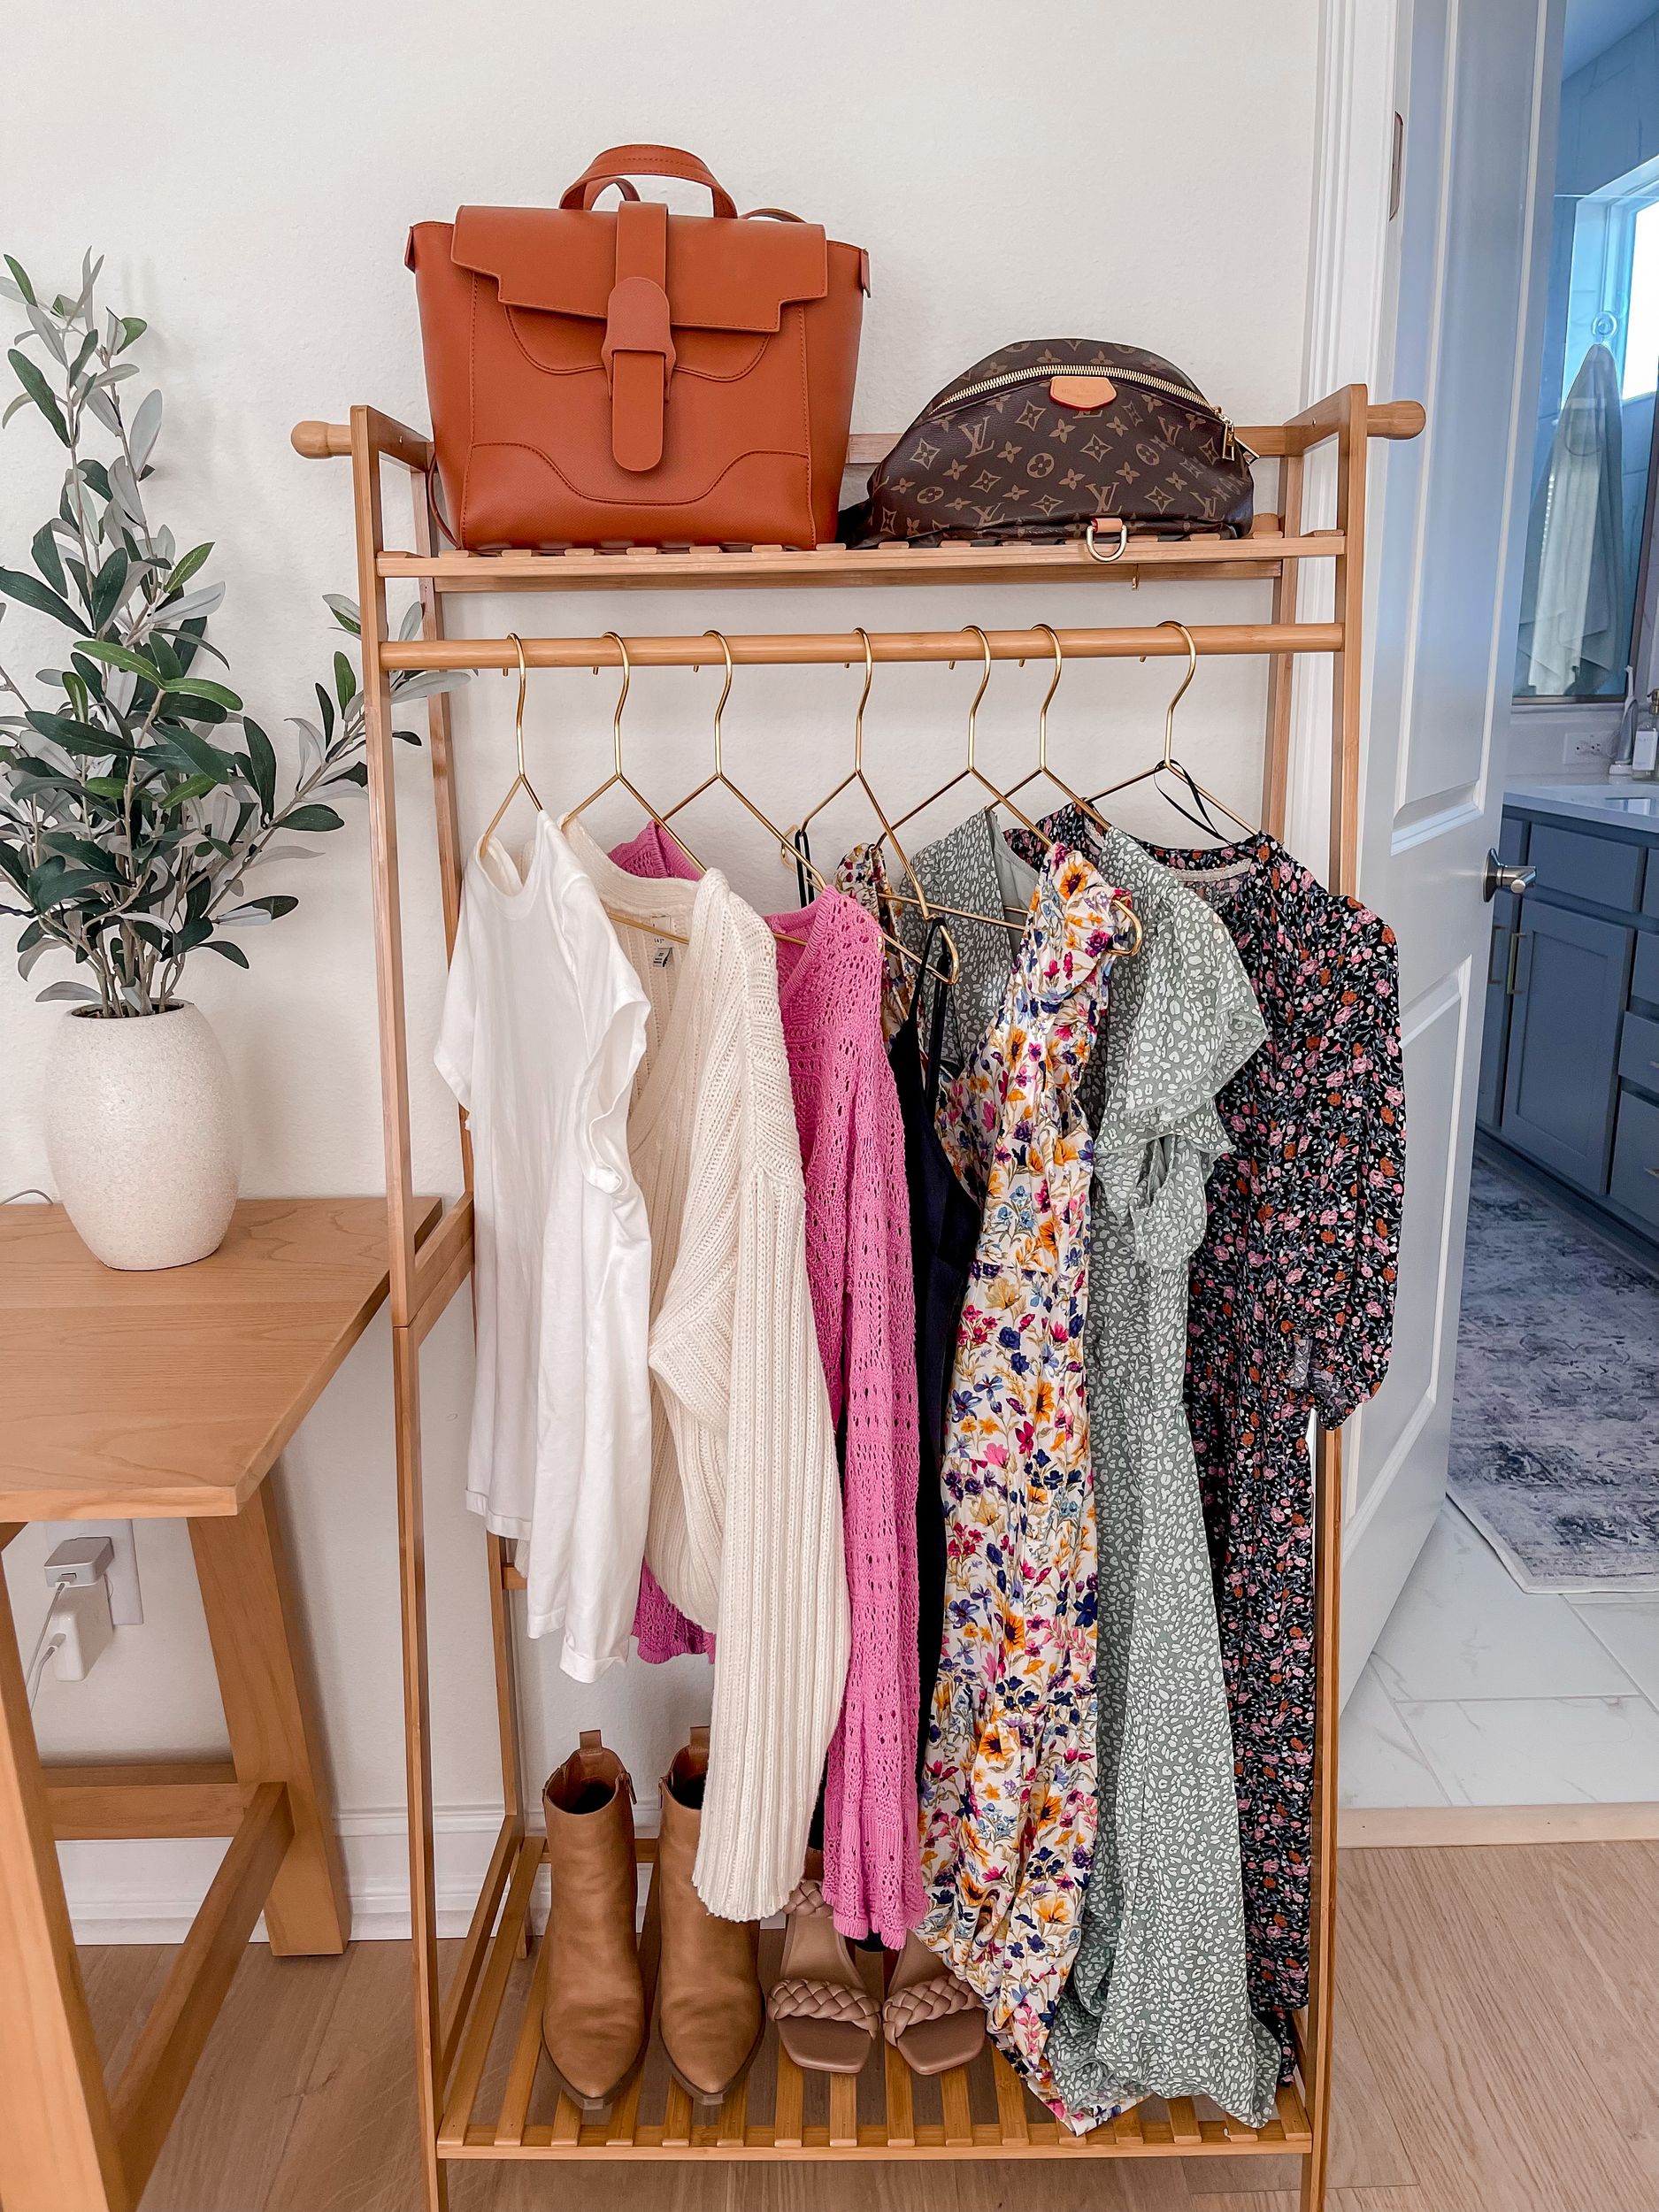 3 Clothing Storage Ideas For Small Spaces